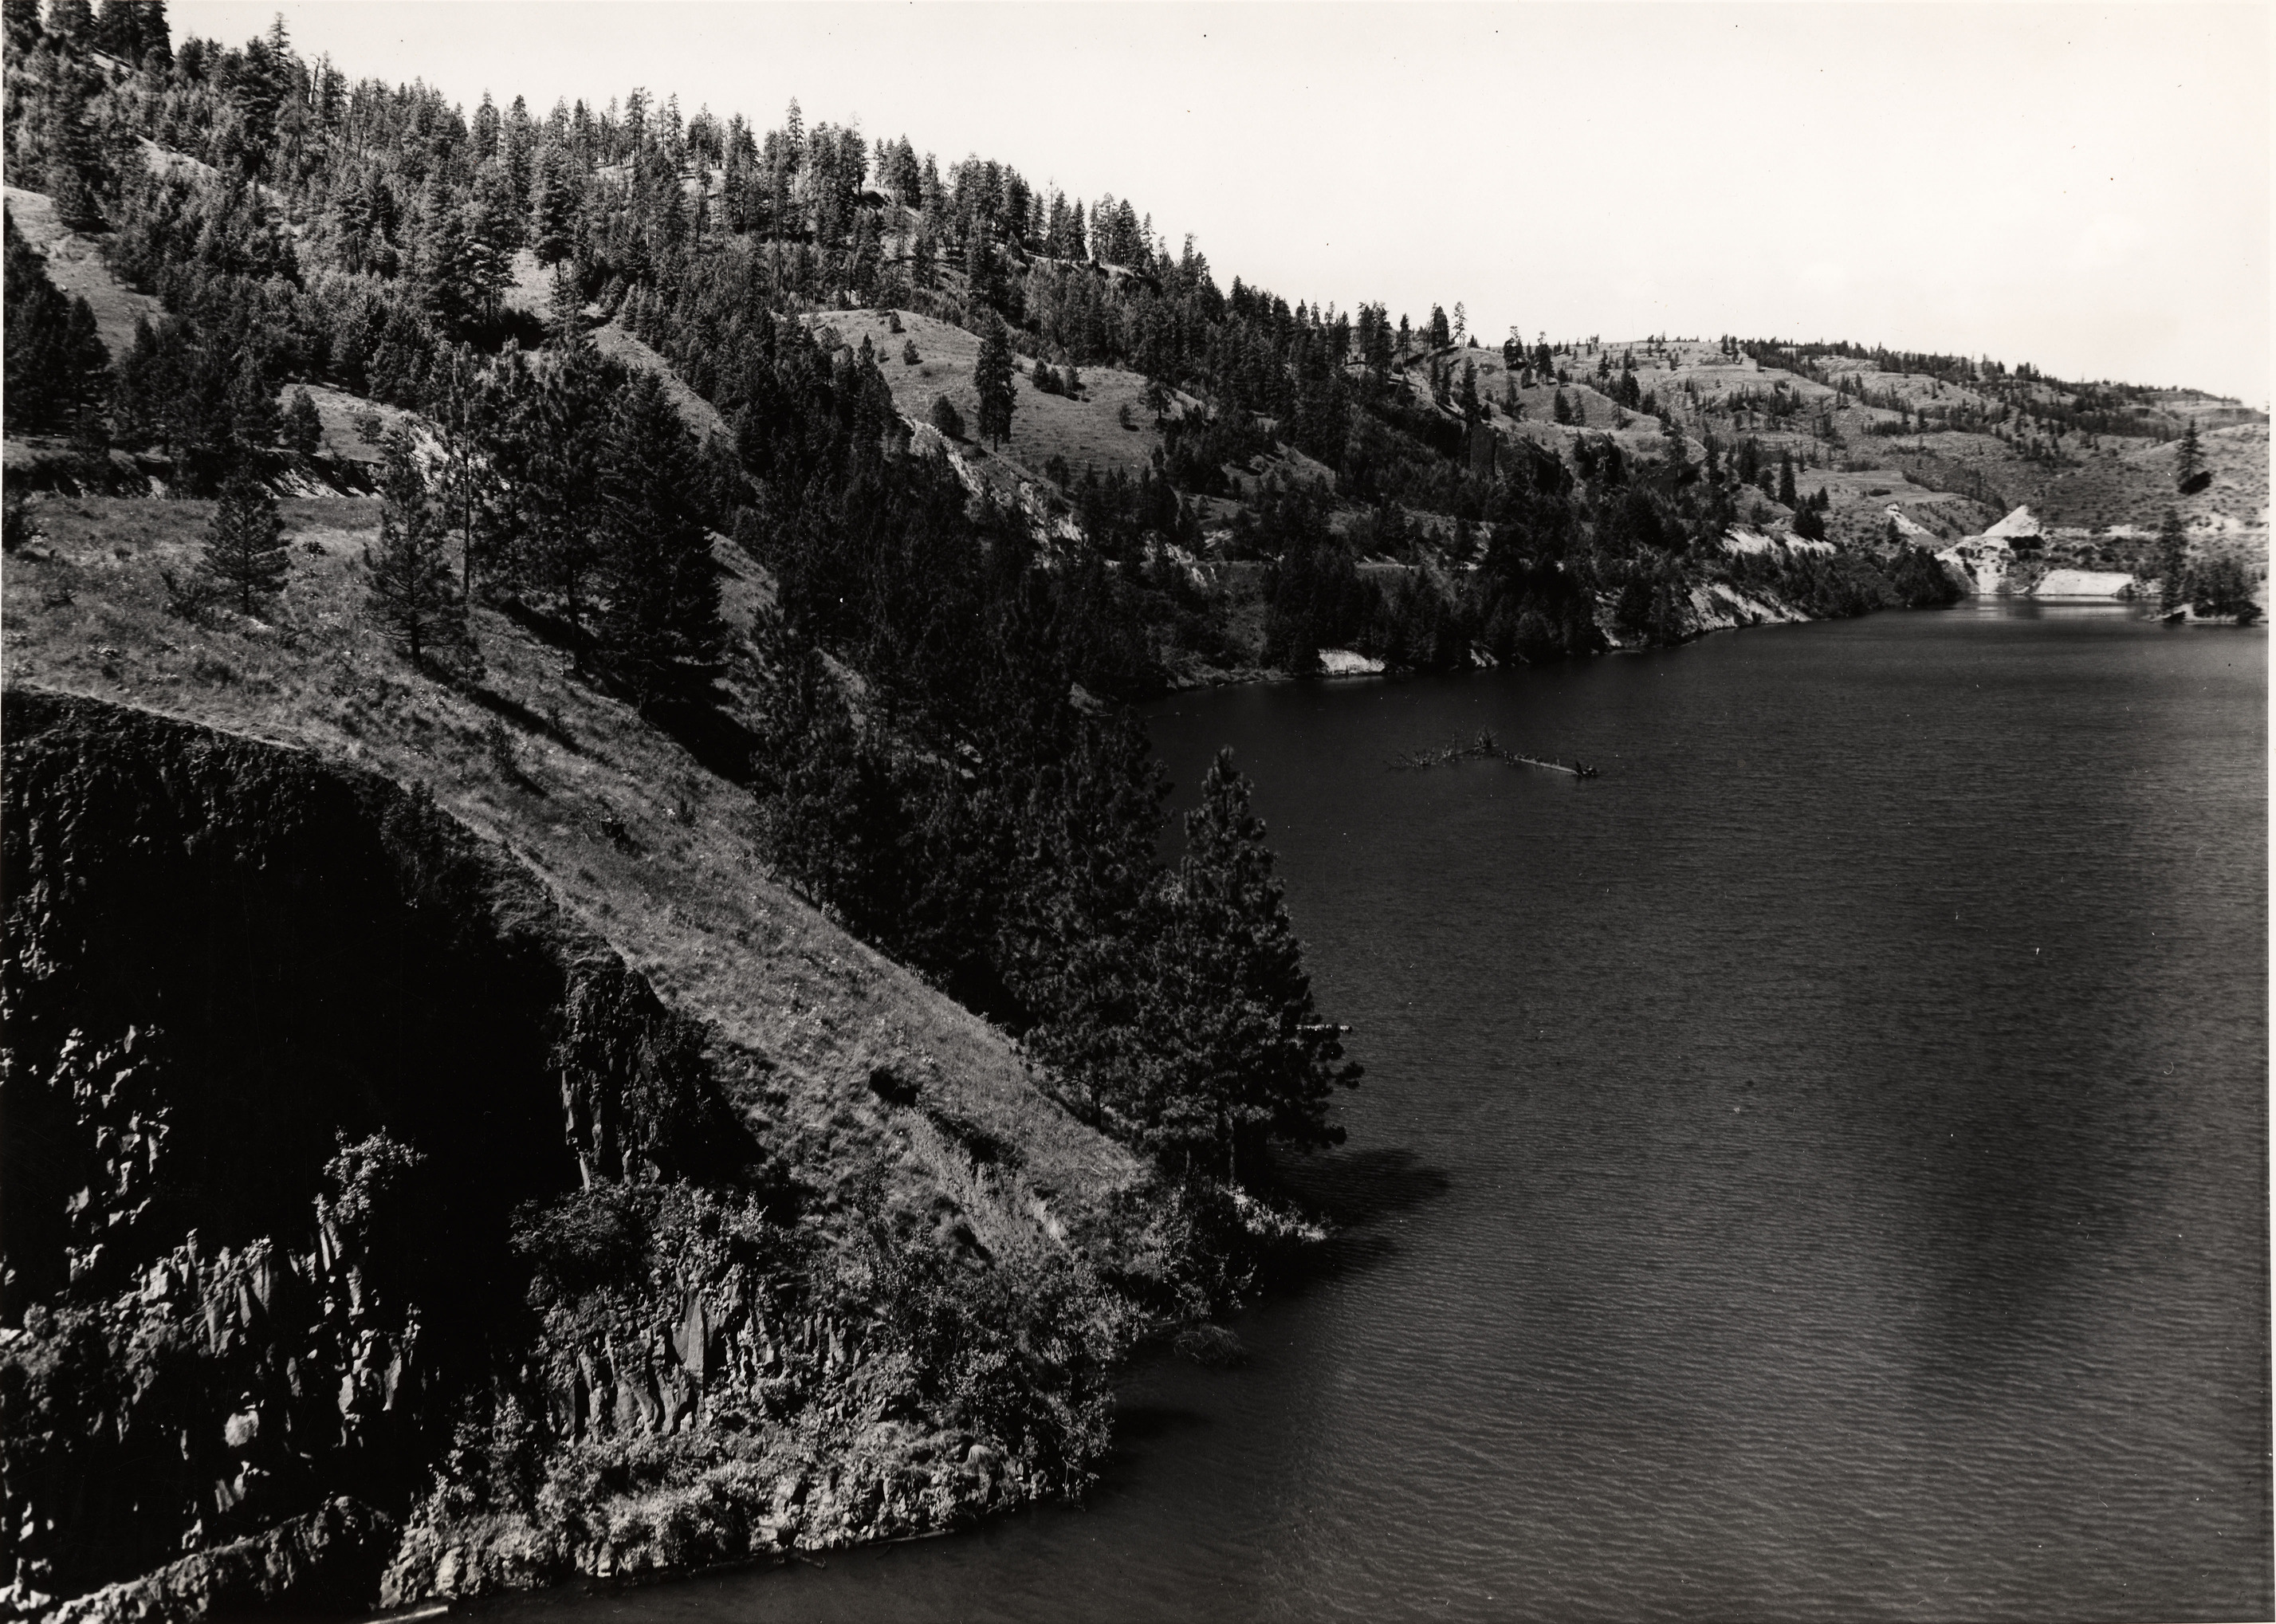 Black and white photograph of a body of water with a steep, forested shoreline